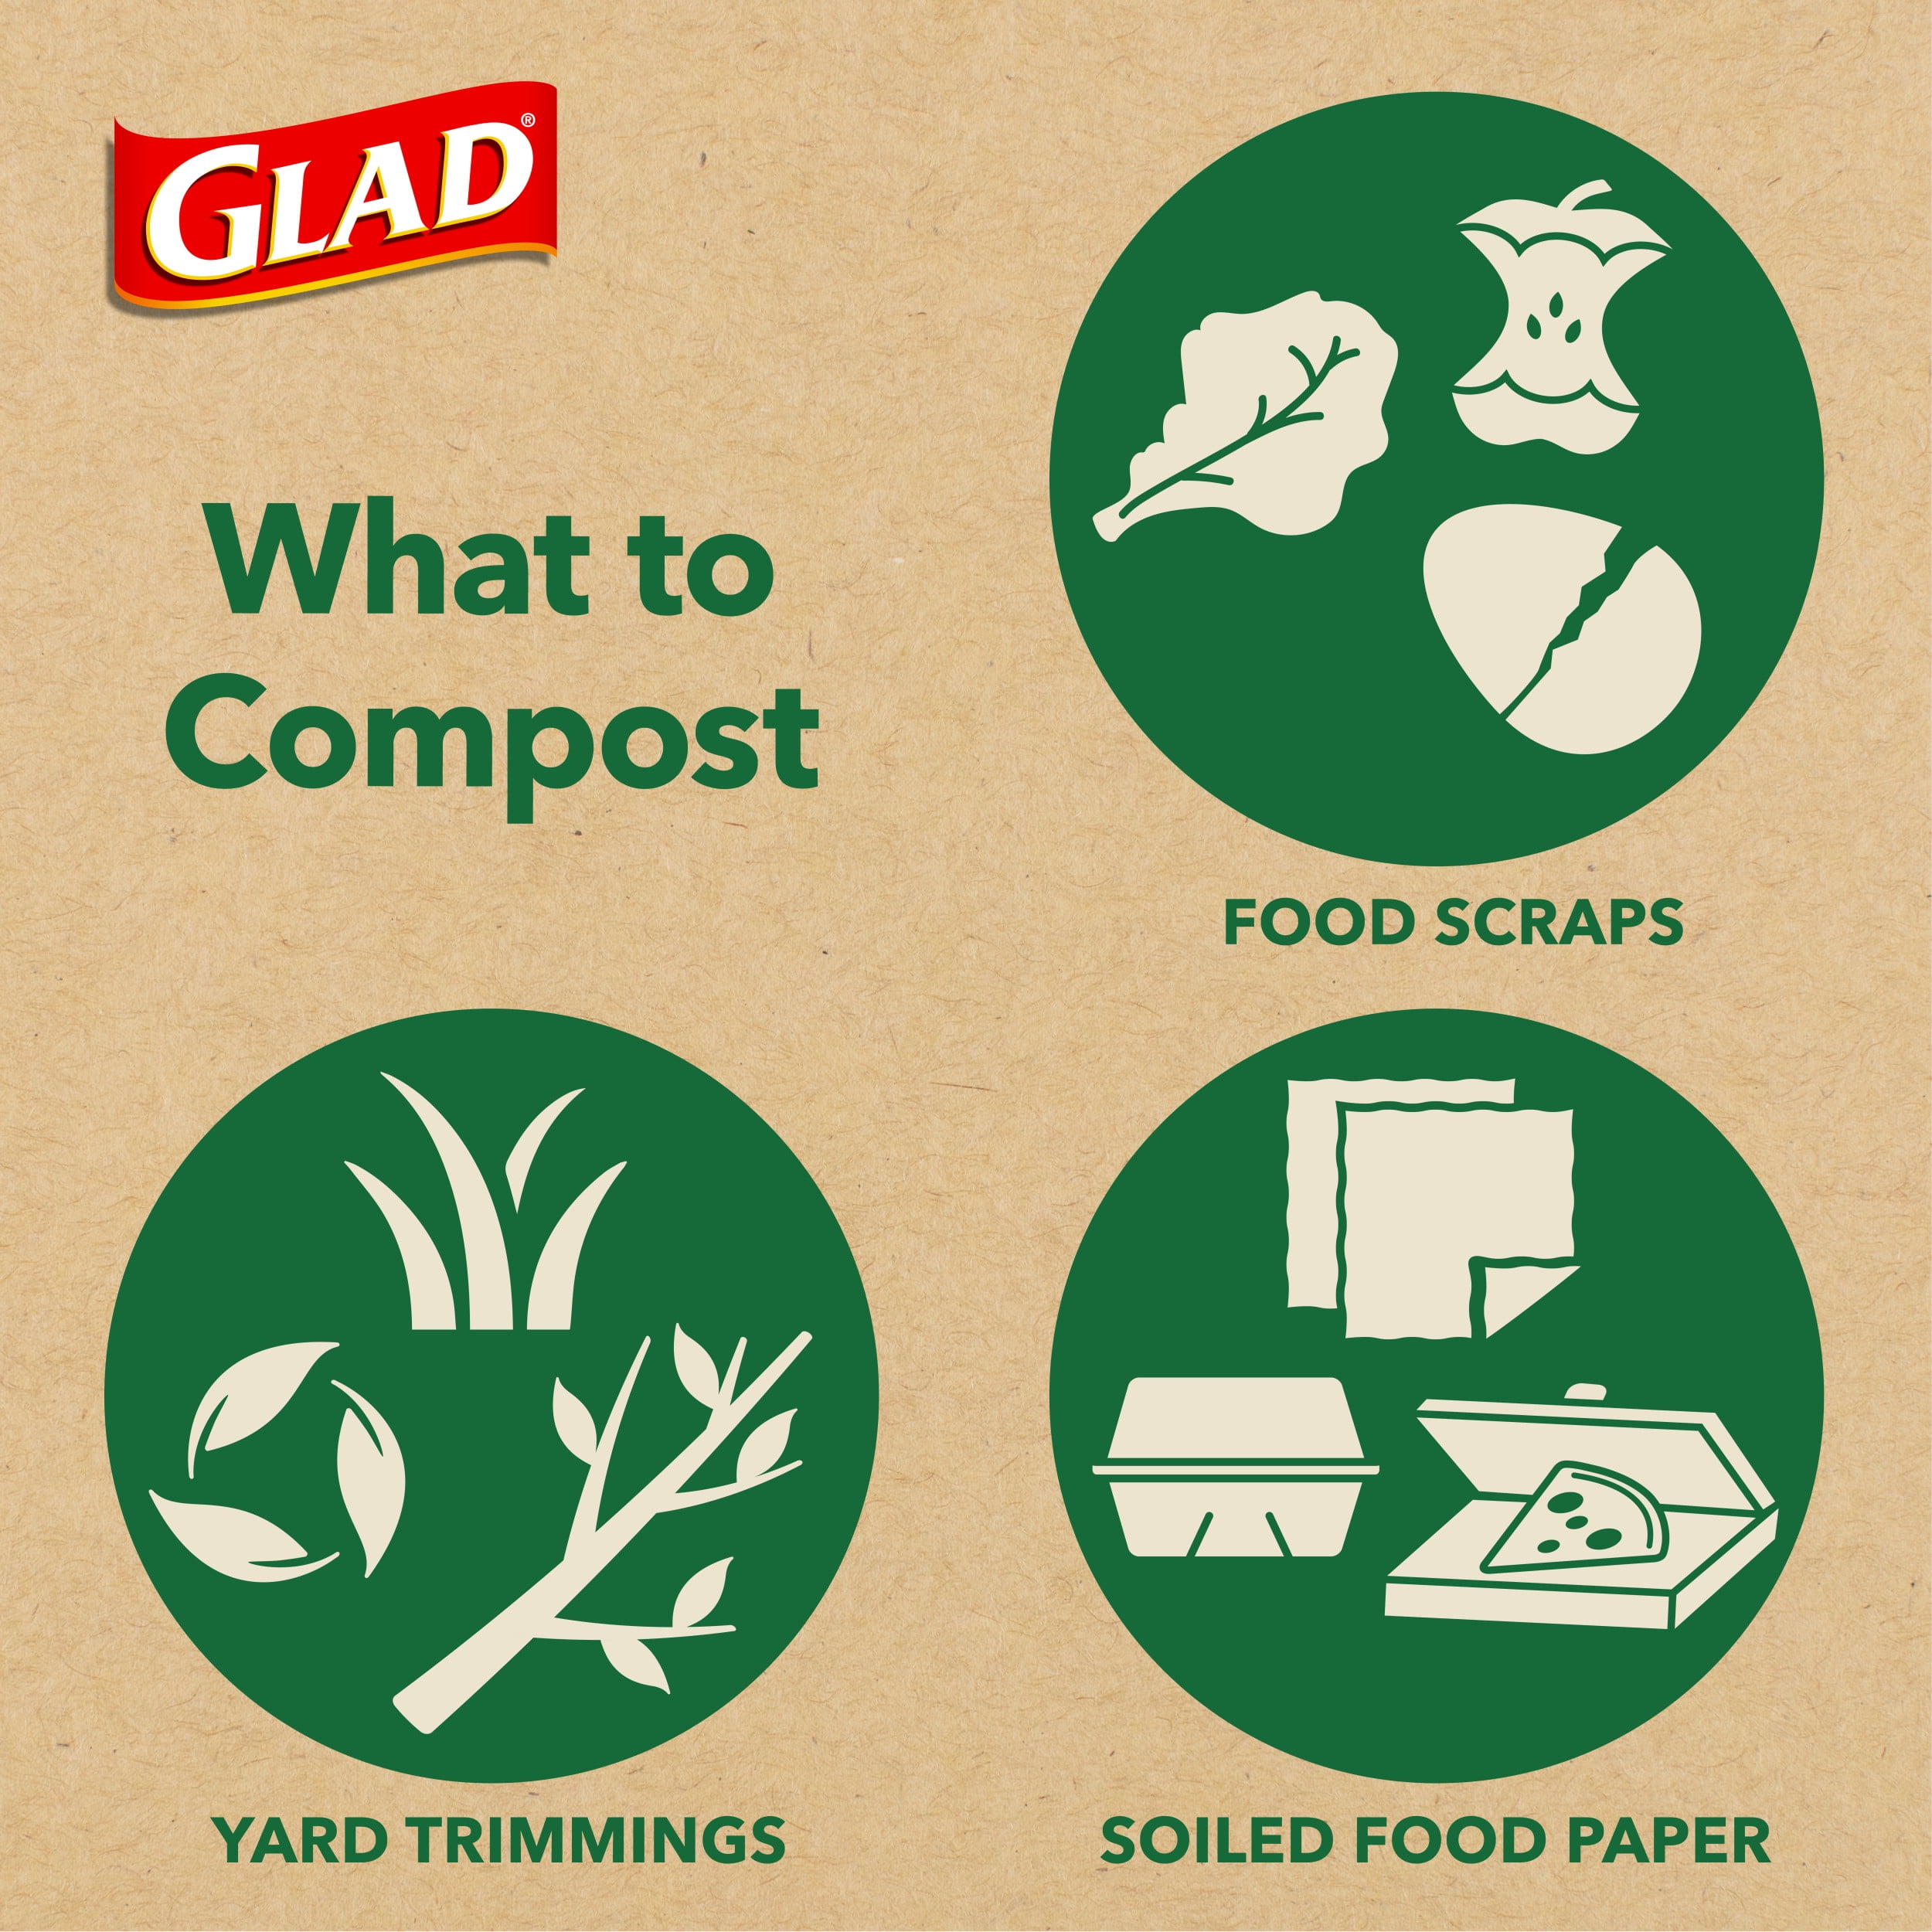 Glad Compost Small Kitchen 2.6 Gallon Trash Bags, Lemon Scent with